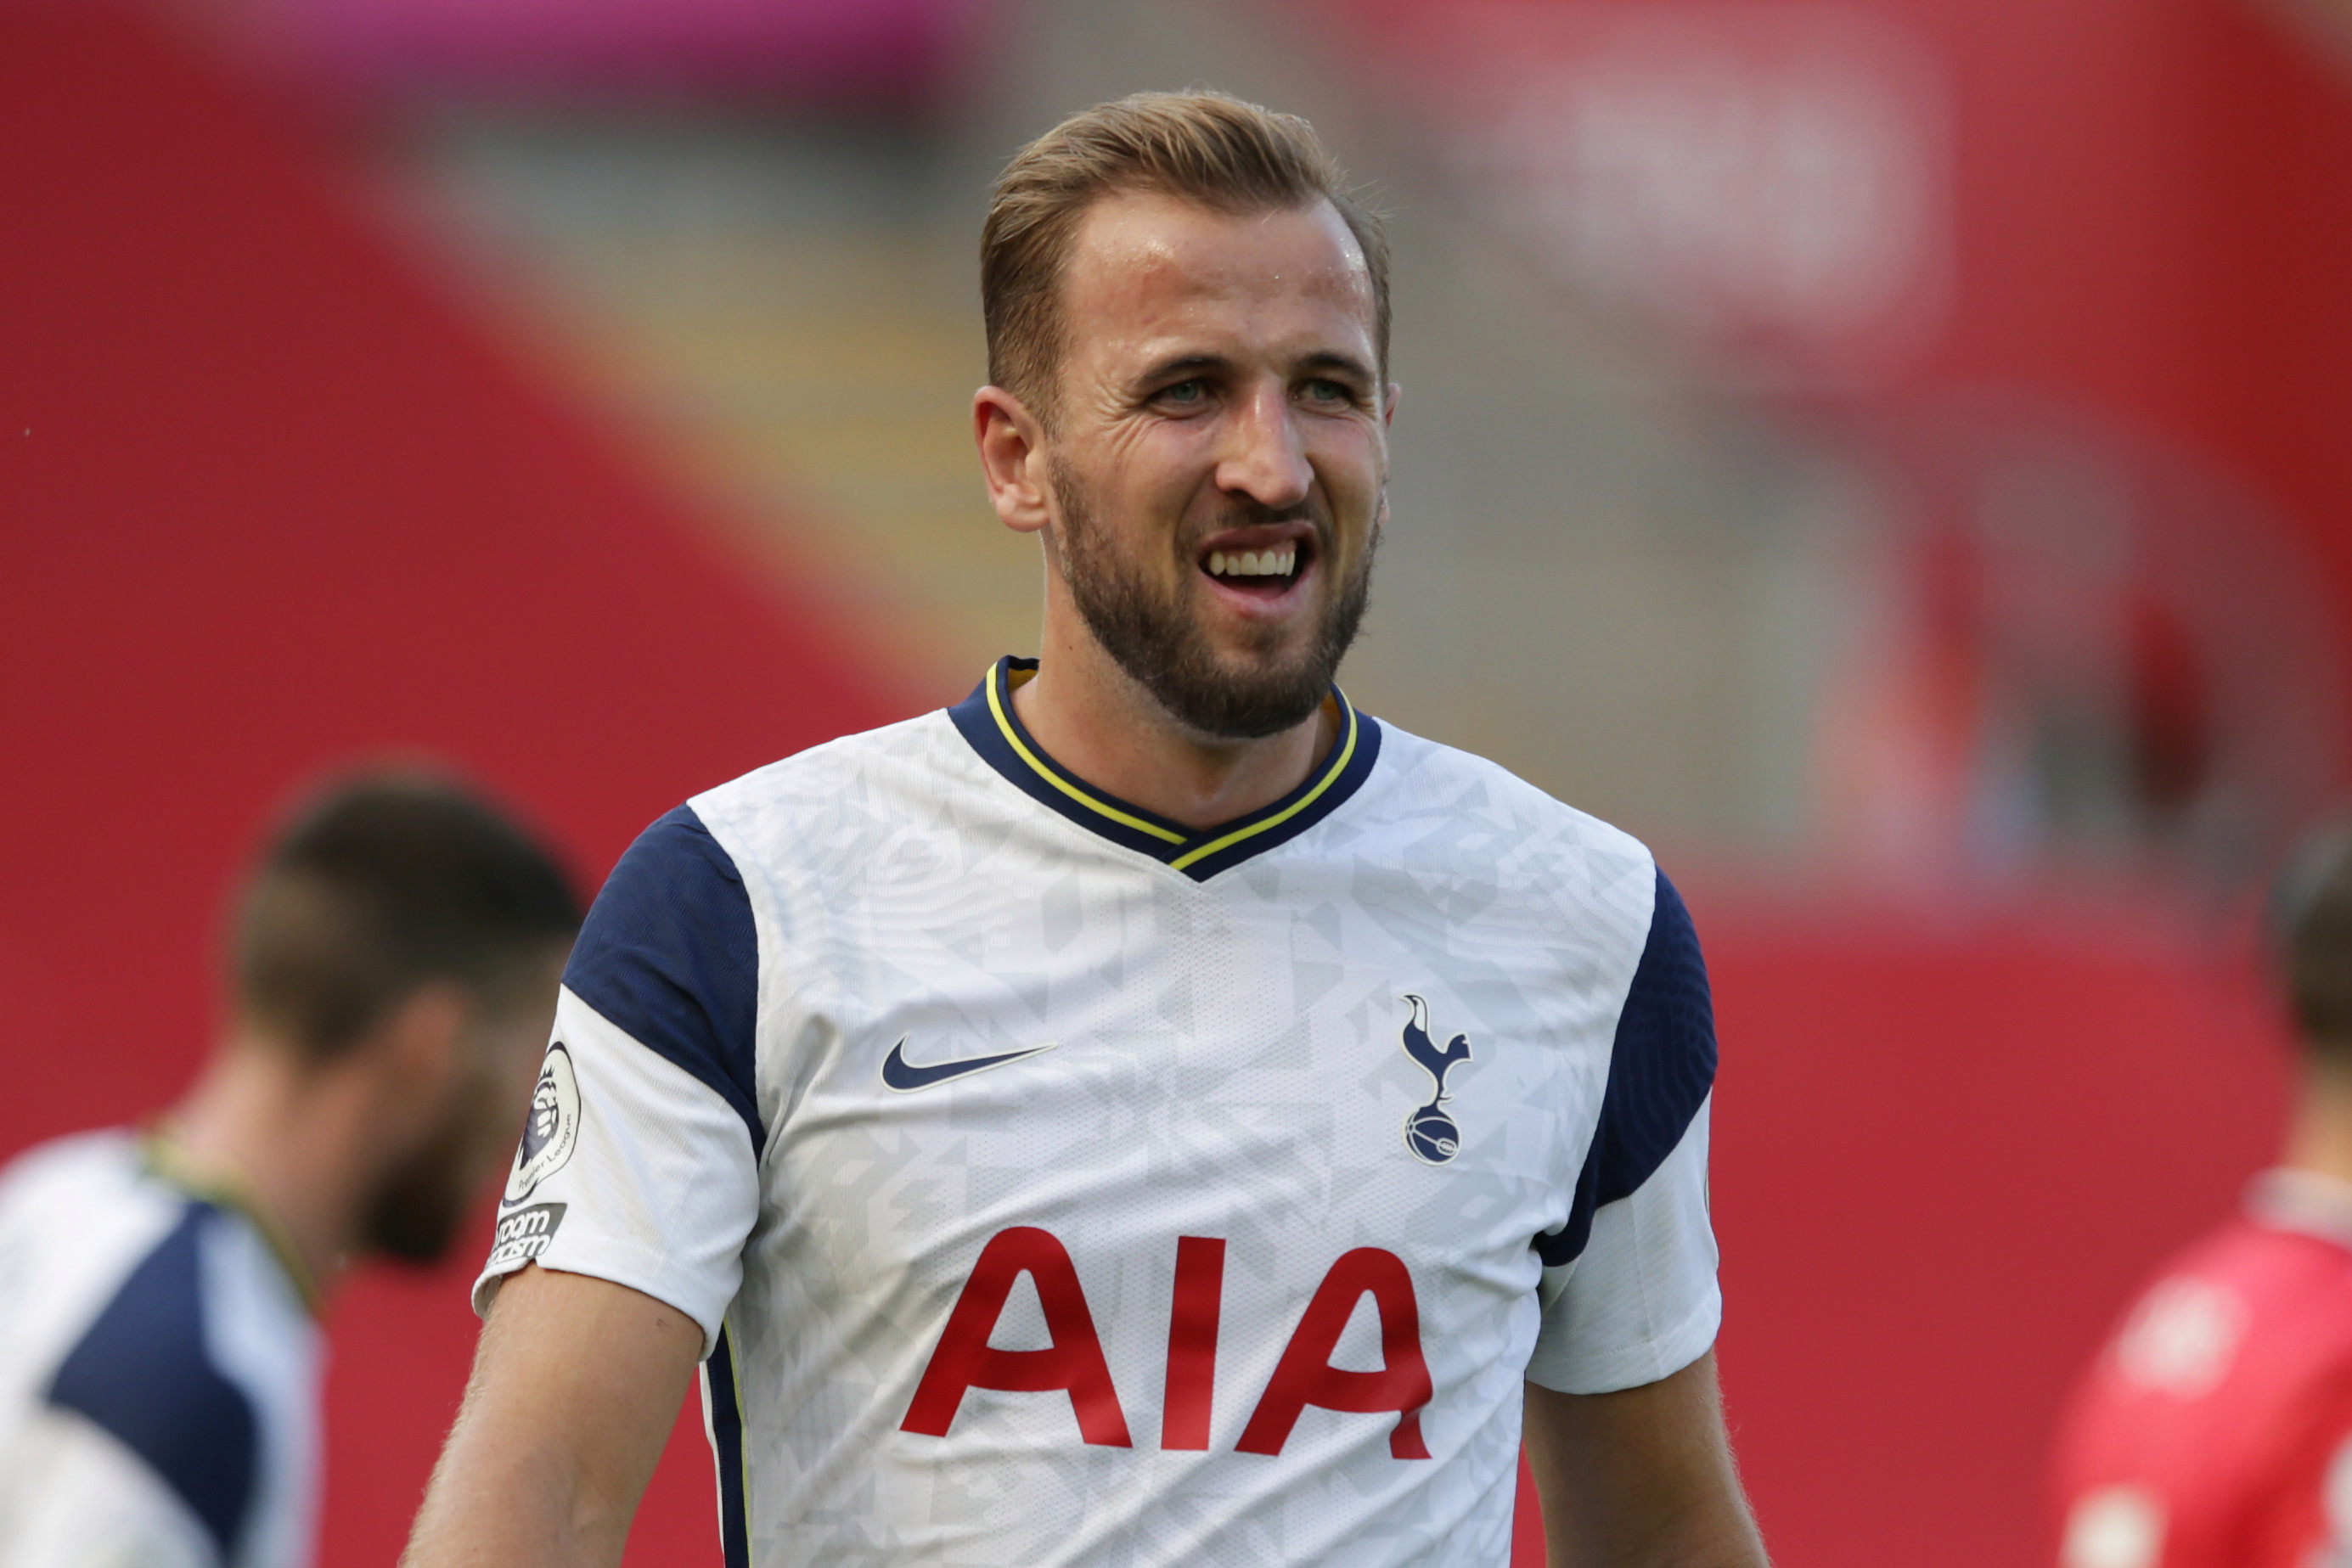 Harry Kane still hoping for Man City move after Tottenham defeat Premier League champions